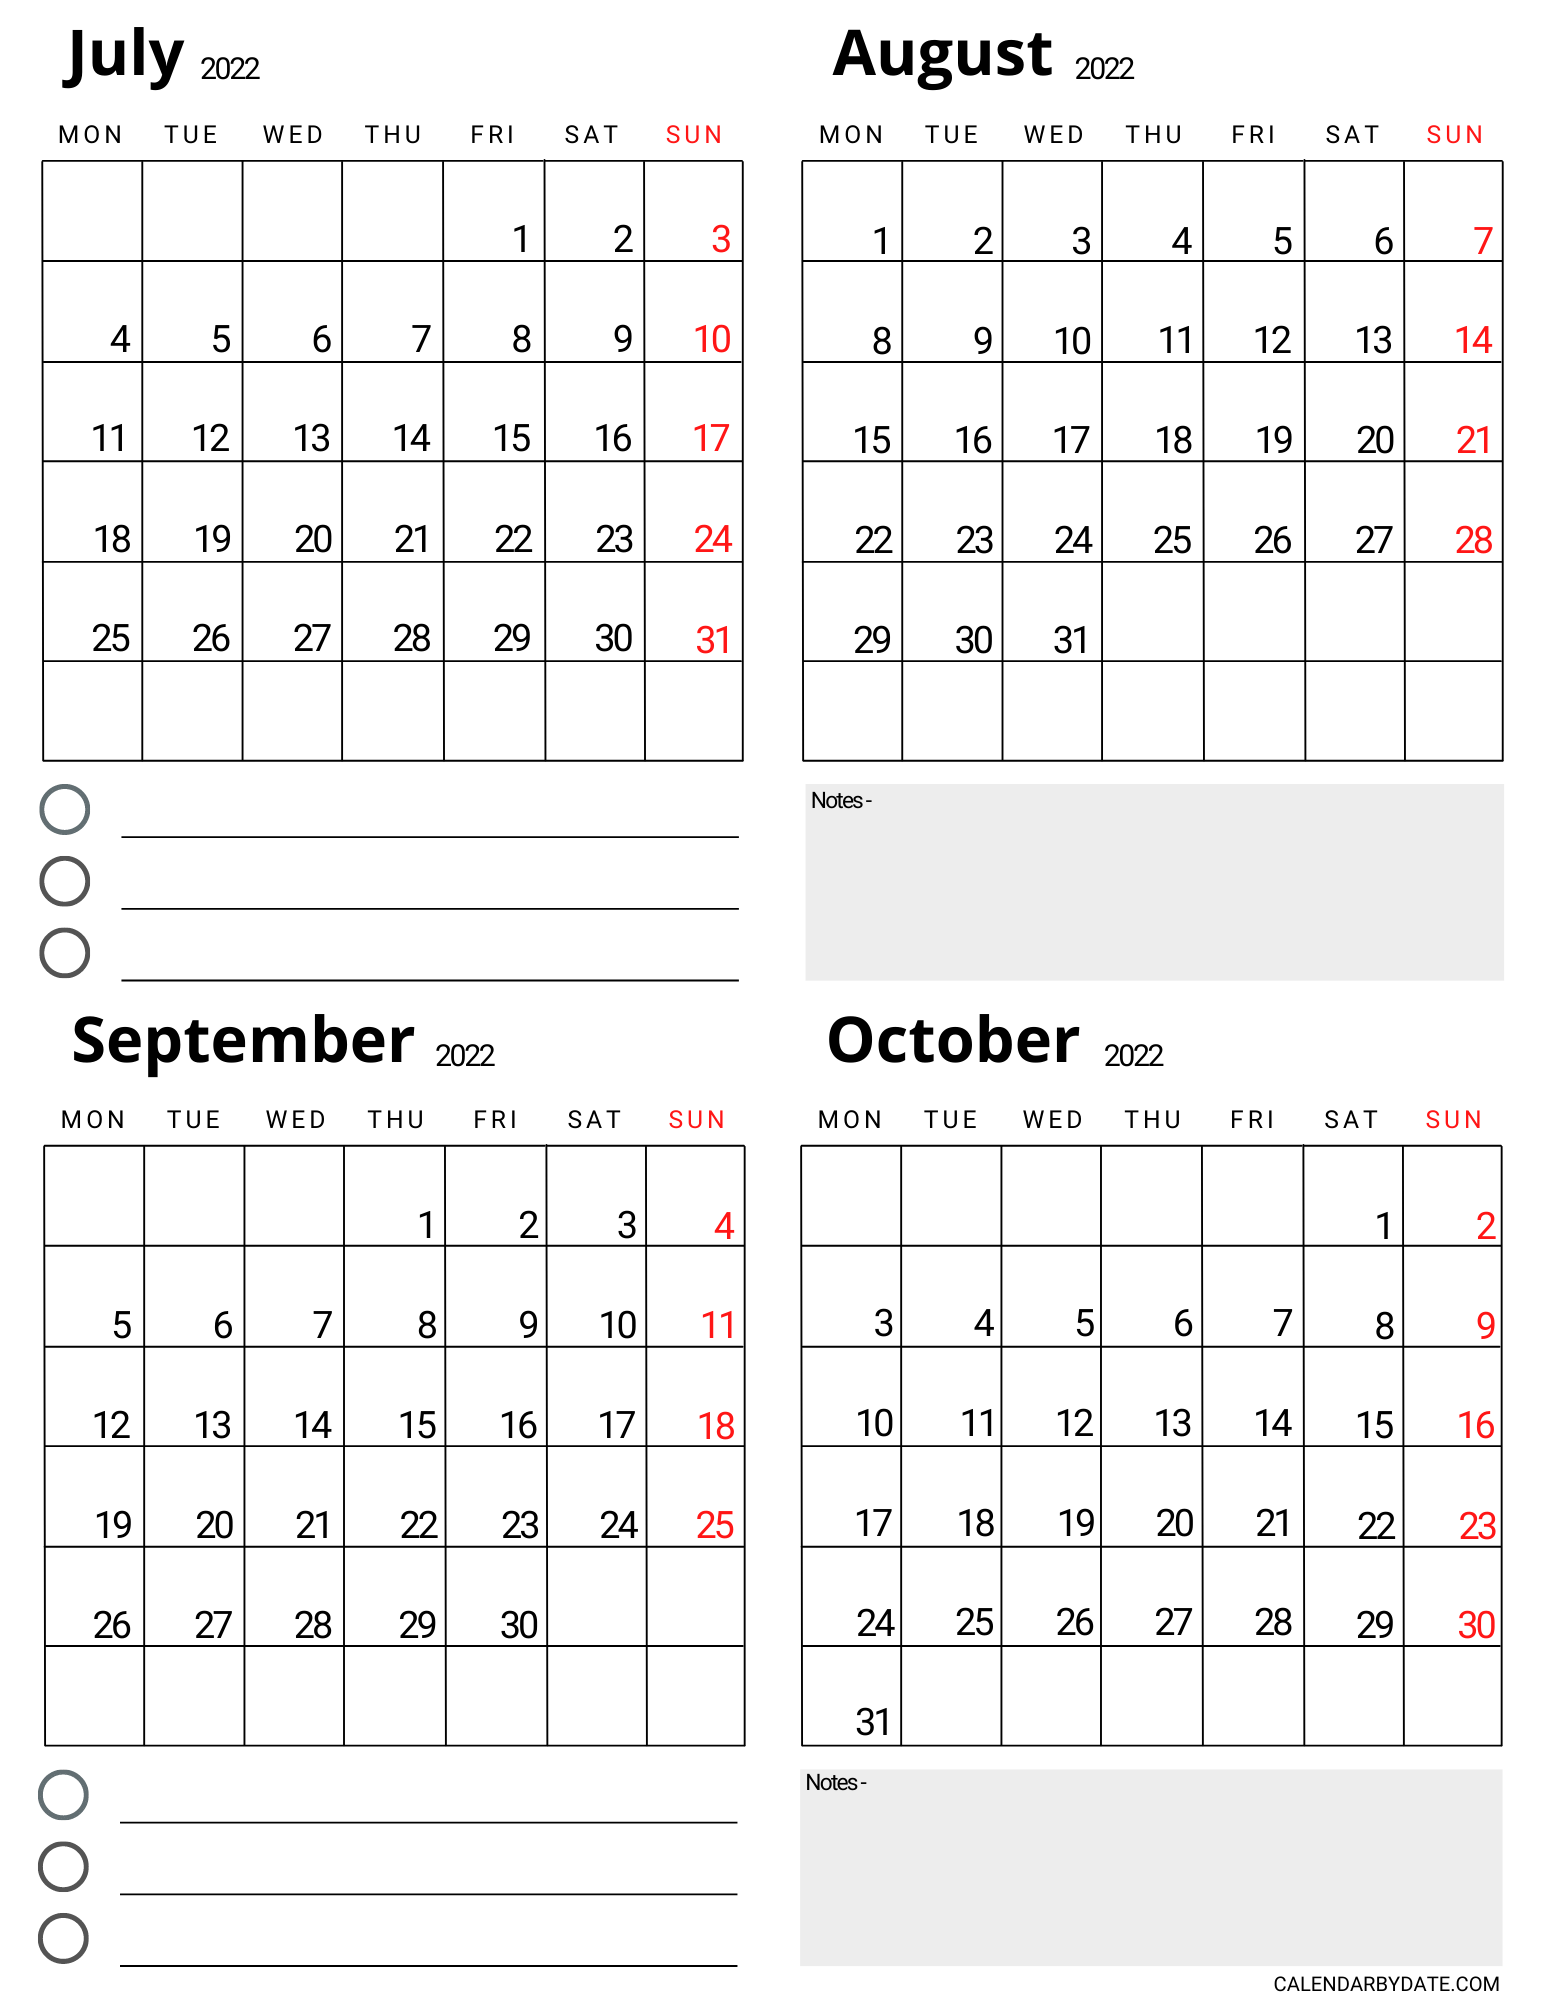 July to October 2022 Four month calendar template with blank notes section and checklist rows to write monthly schedules, events and important dates.